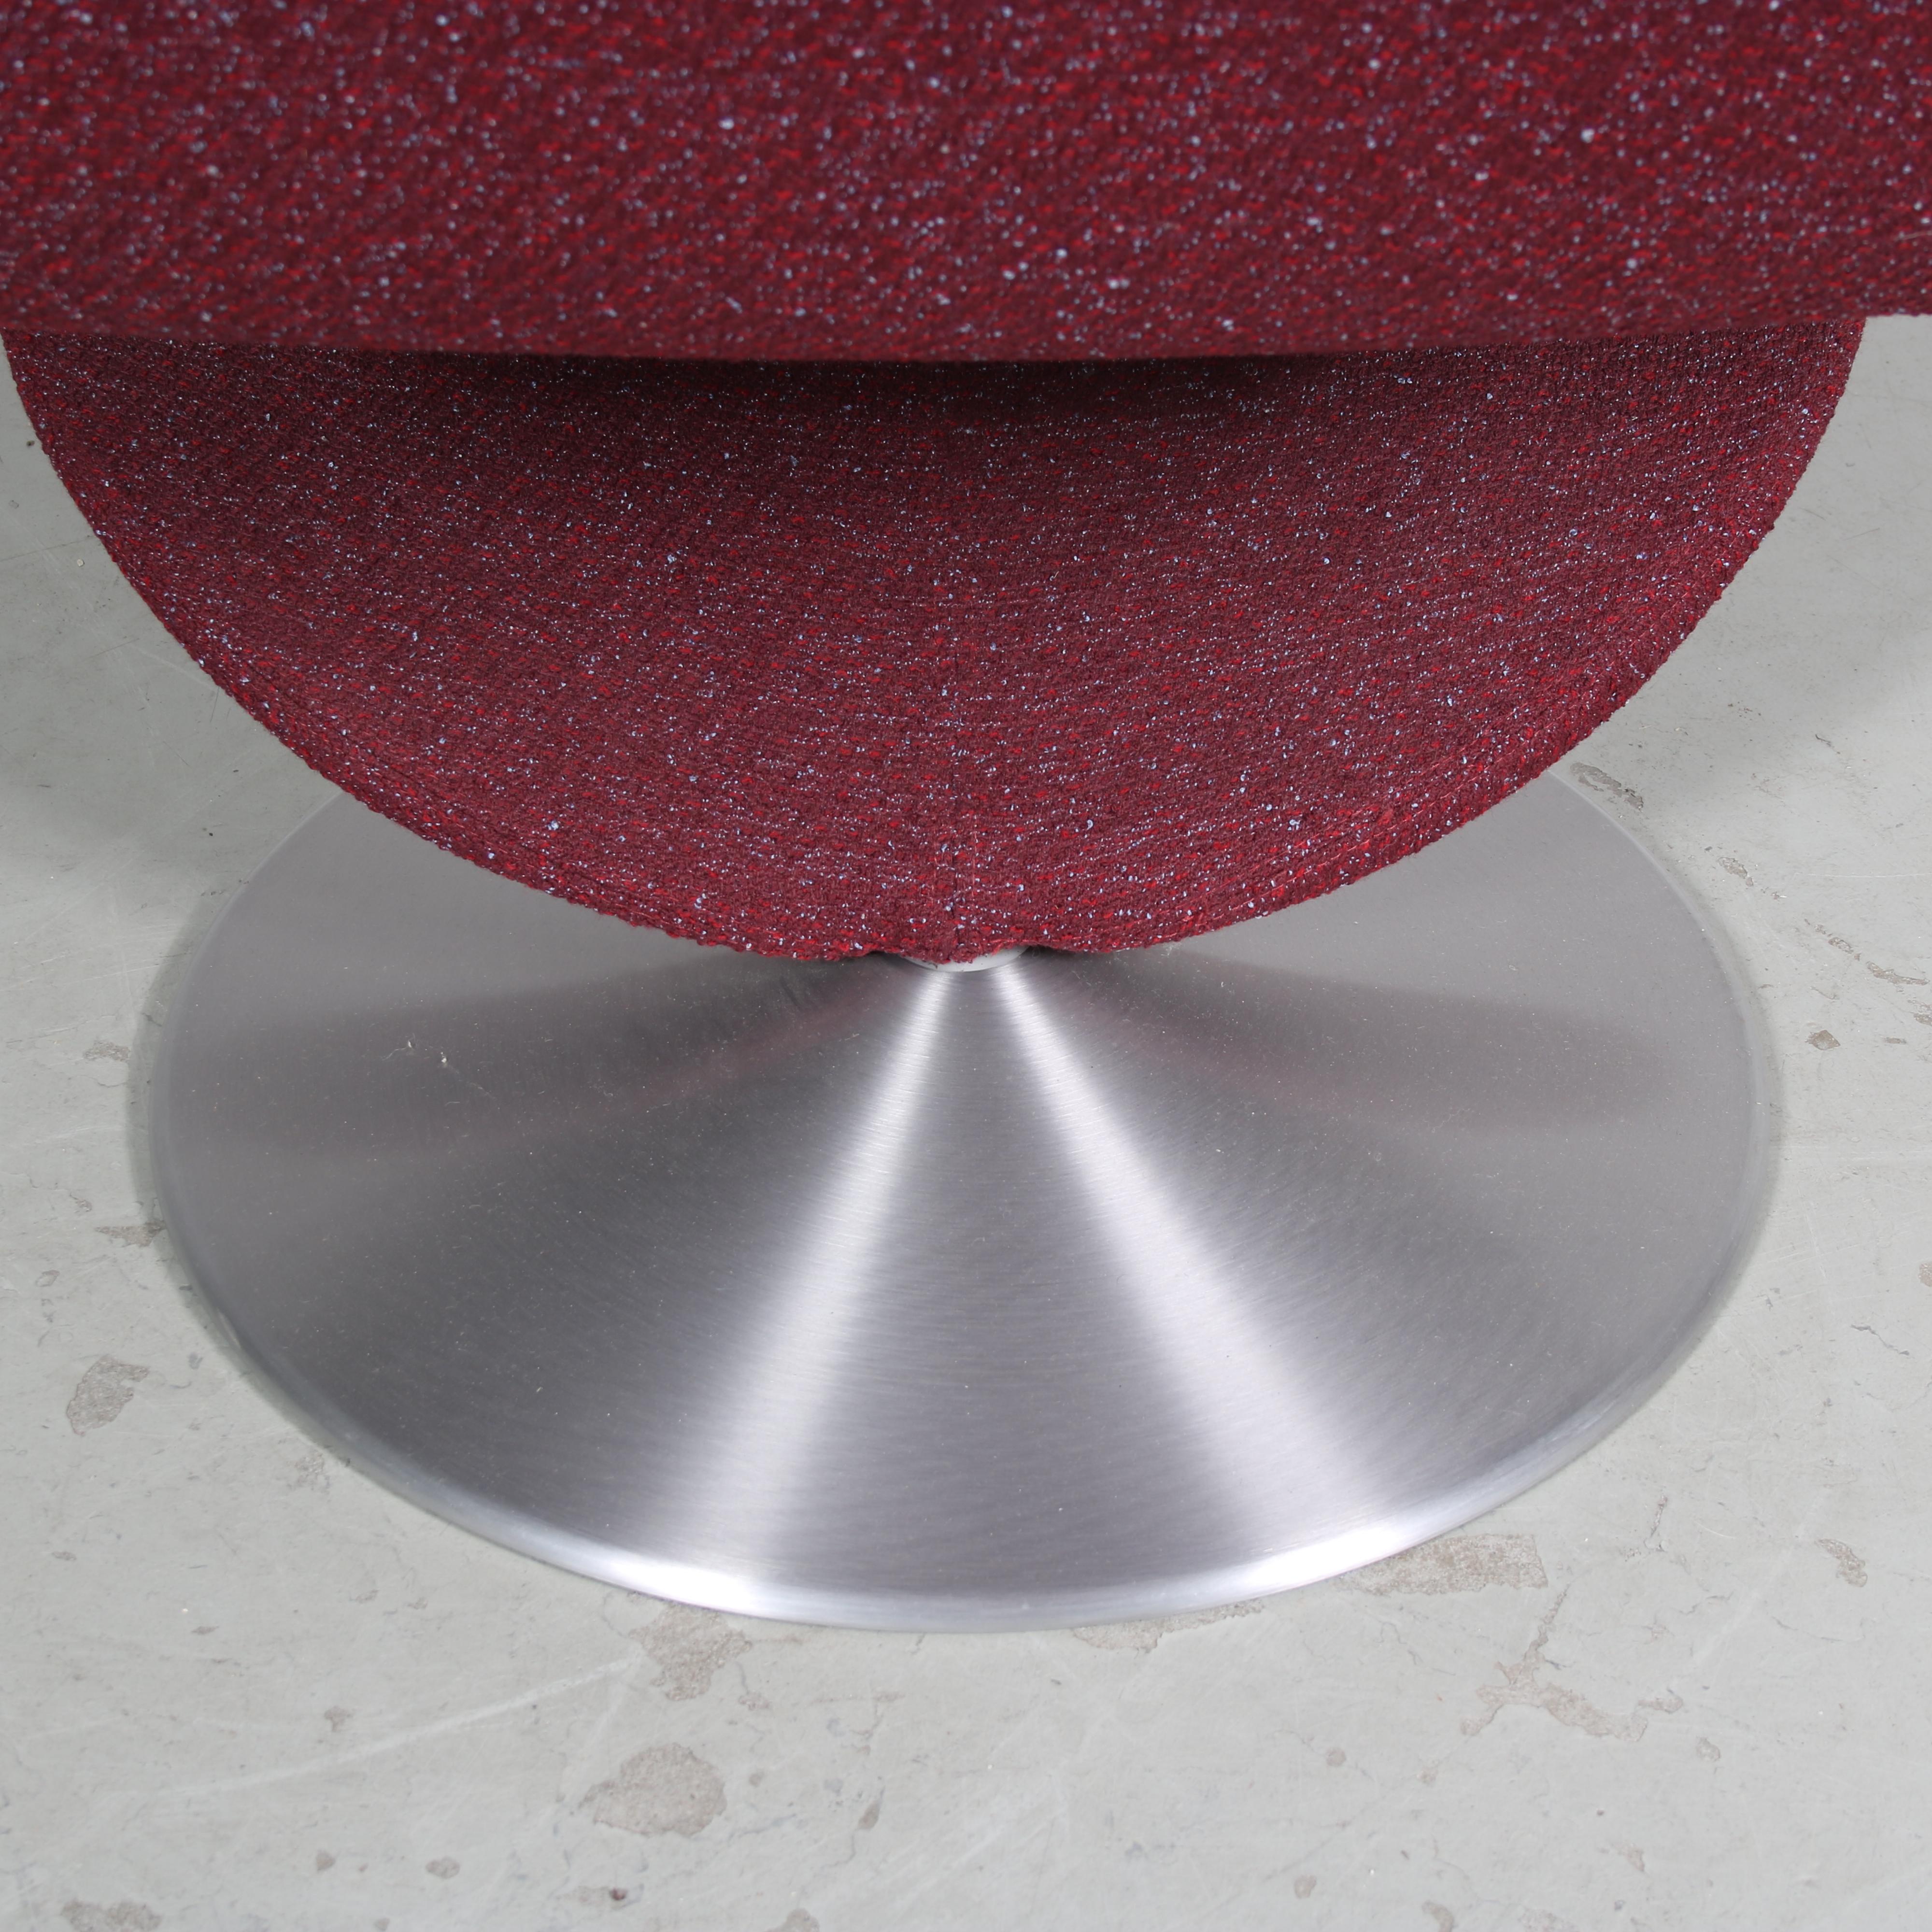 2020s Edition of 1970s 1-2-3 Chair by Verner Panton for VerPan, Denmark For Sale 5